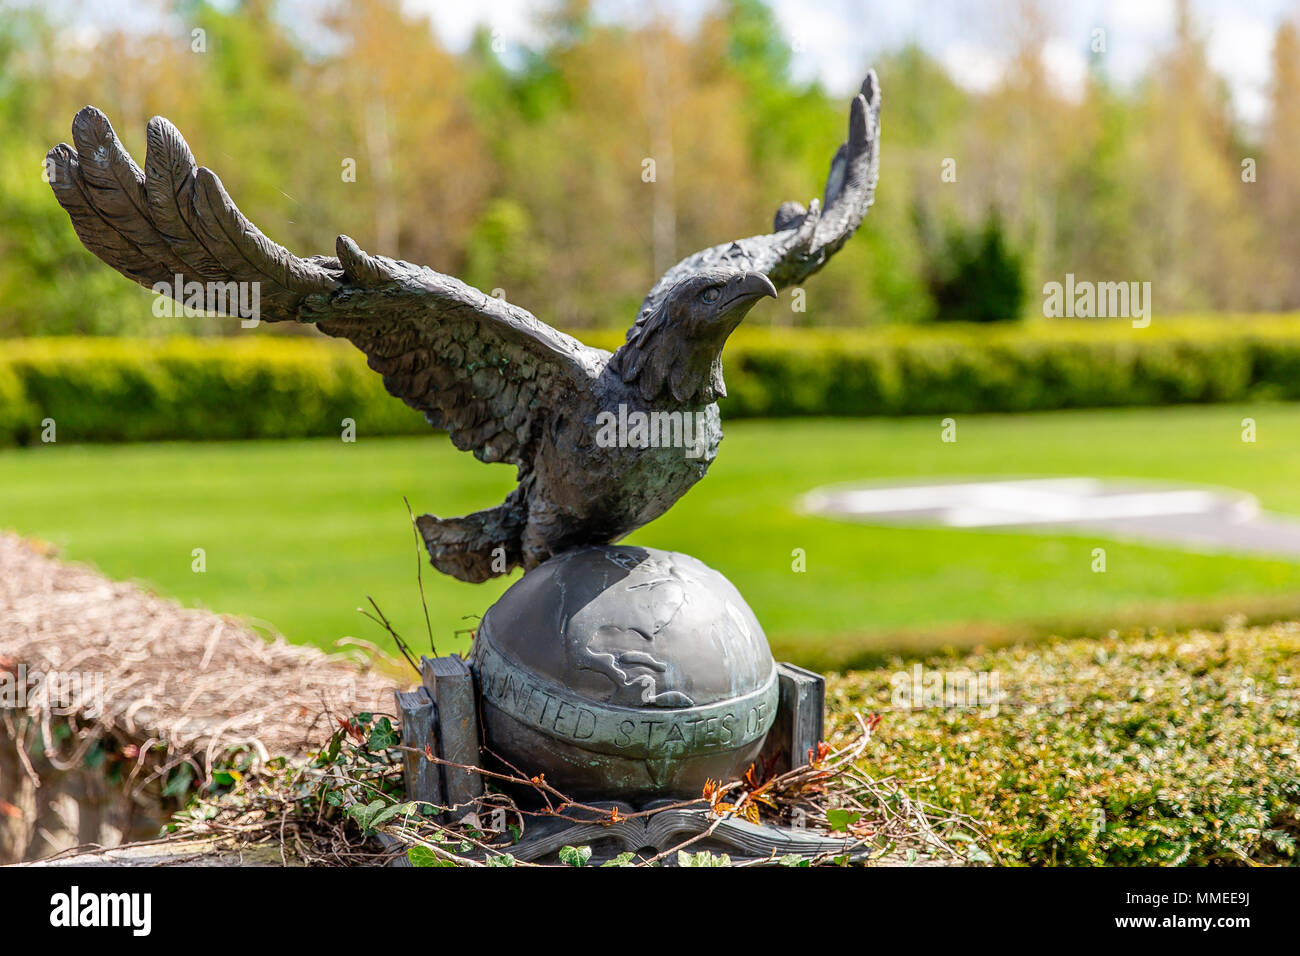 Sculpture of Eagle with spread wings sitting on a globe with North America continent. Helipad in the background. Stock Photo